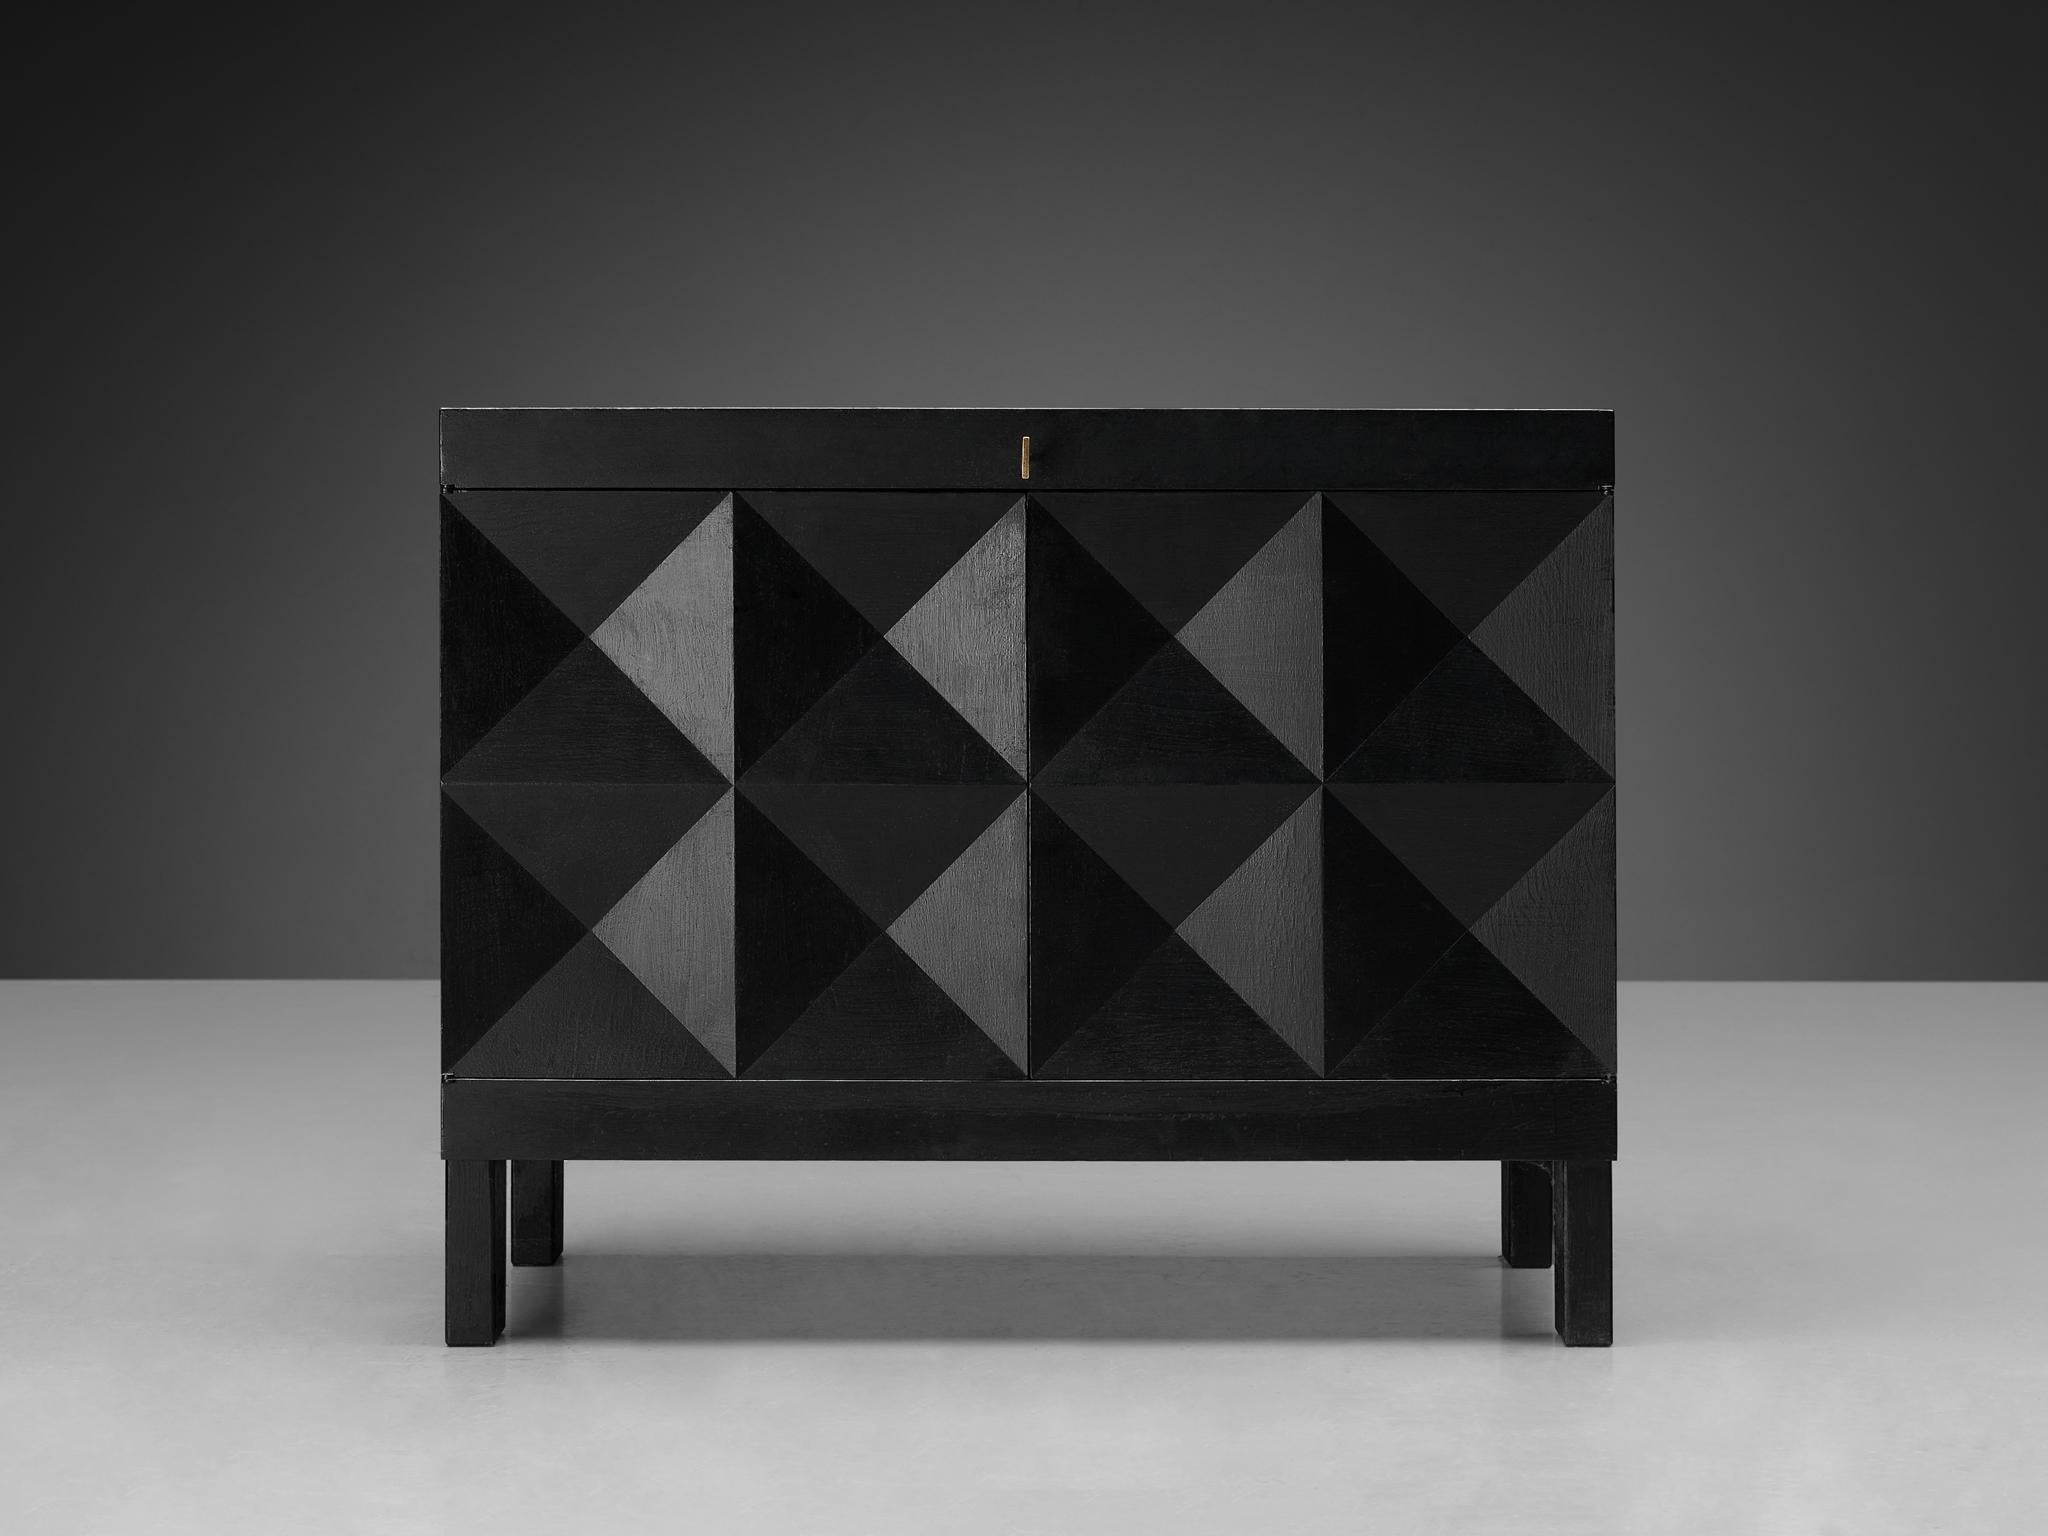 Brutalist cabinet, oak, Belgium, 1970s. 

This cabinet is a real eye-catcher in the style of De Coene. The cabinet shows an intriguing graphic pattern on its doors. The sideboard features graphical designed doors that add a wonderful rhythmic and